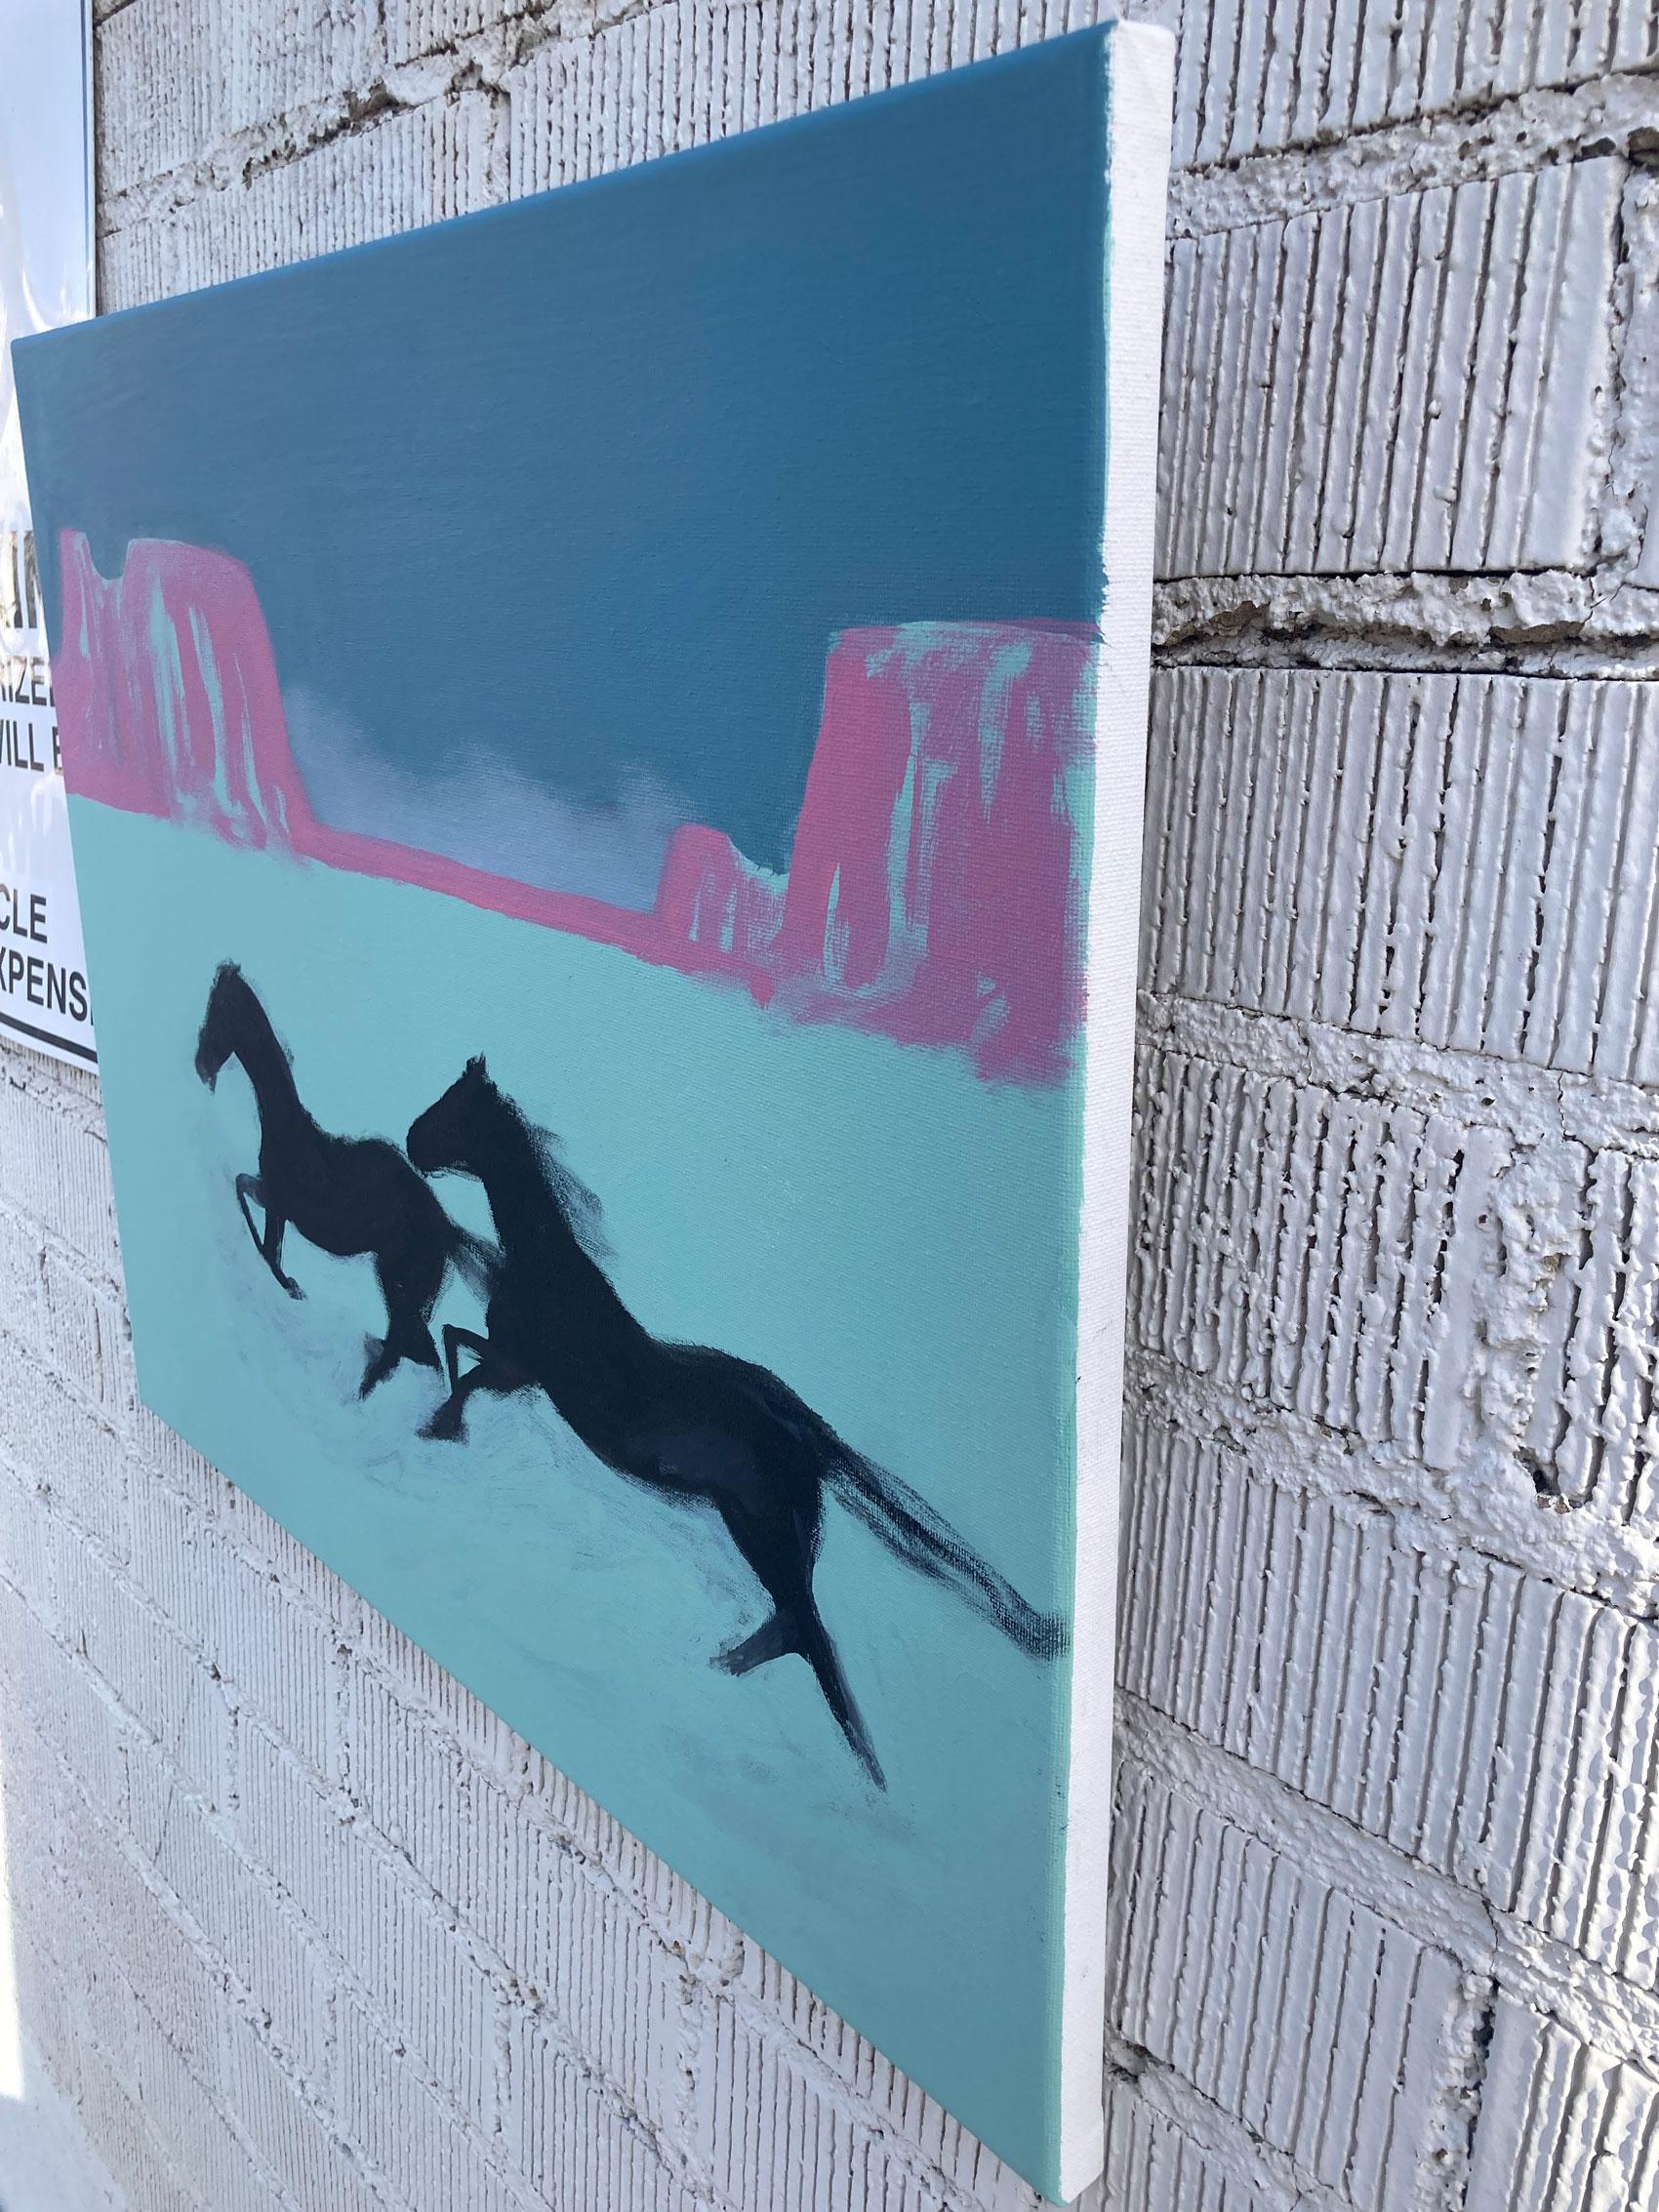 <p>Artist Comments<br>Artist Nick Bontorno exhibits wild horses running in the desert. The pair sprawl through the canyons with reckless abandon. The pink and turquoise hues create a vibrant and energetic display. Nick's painterly approach further